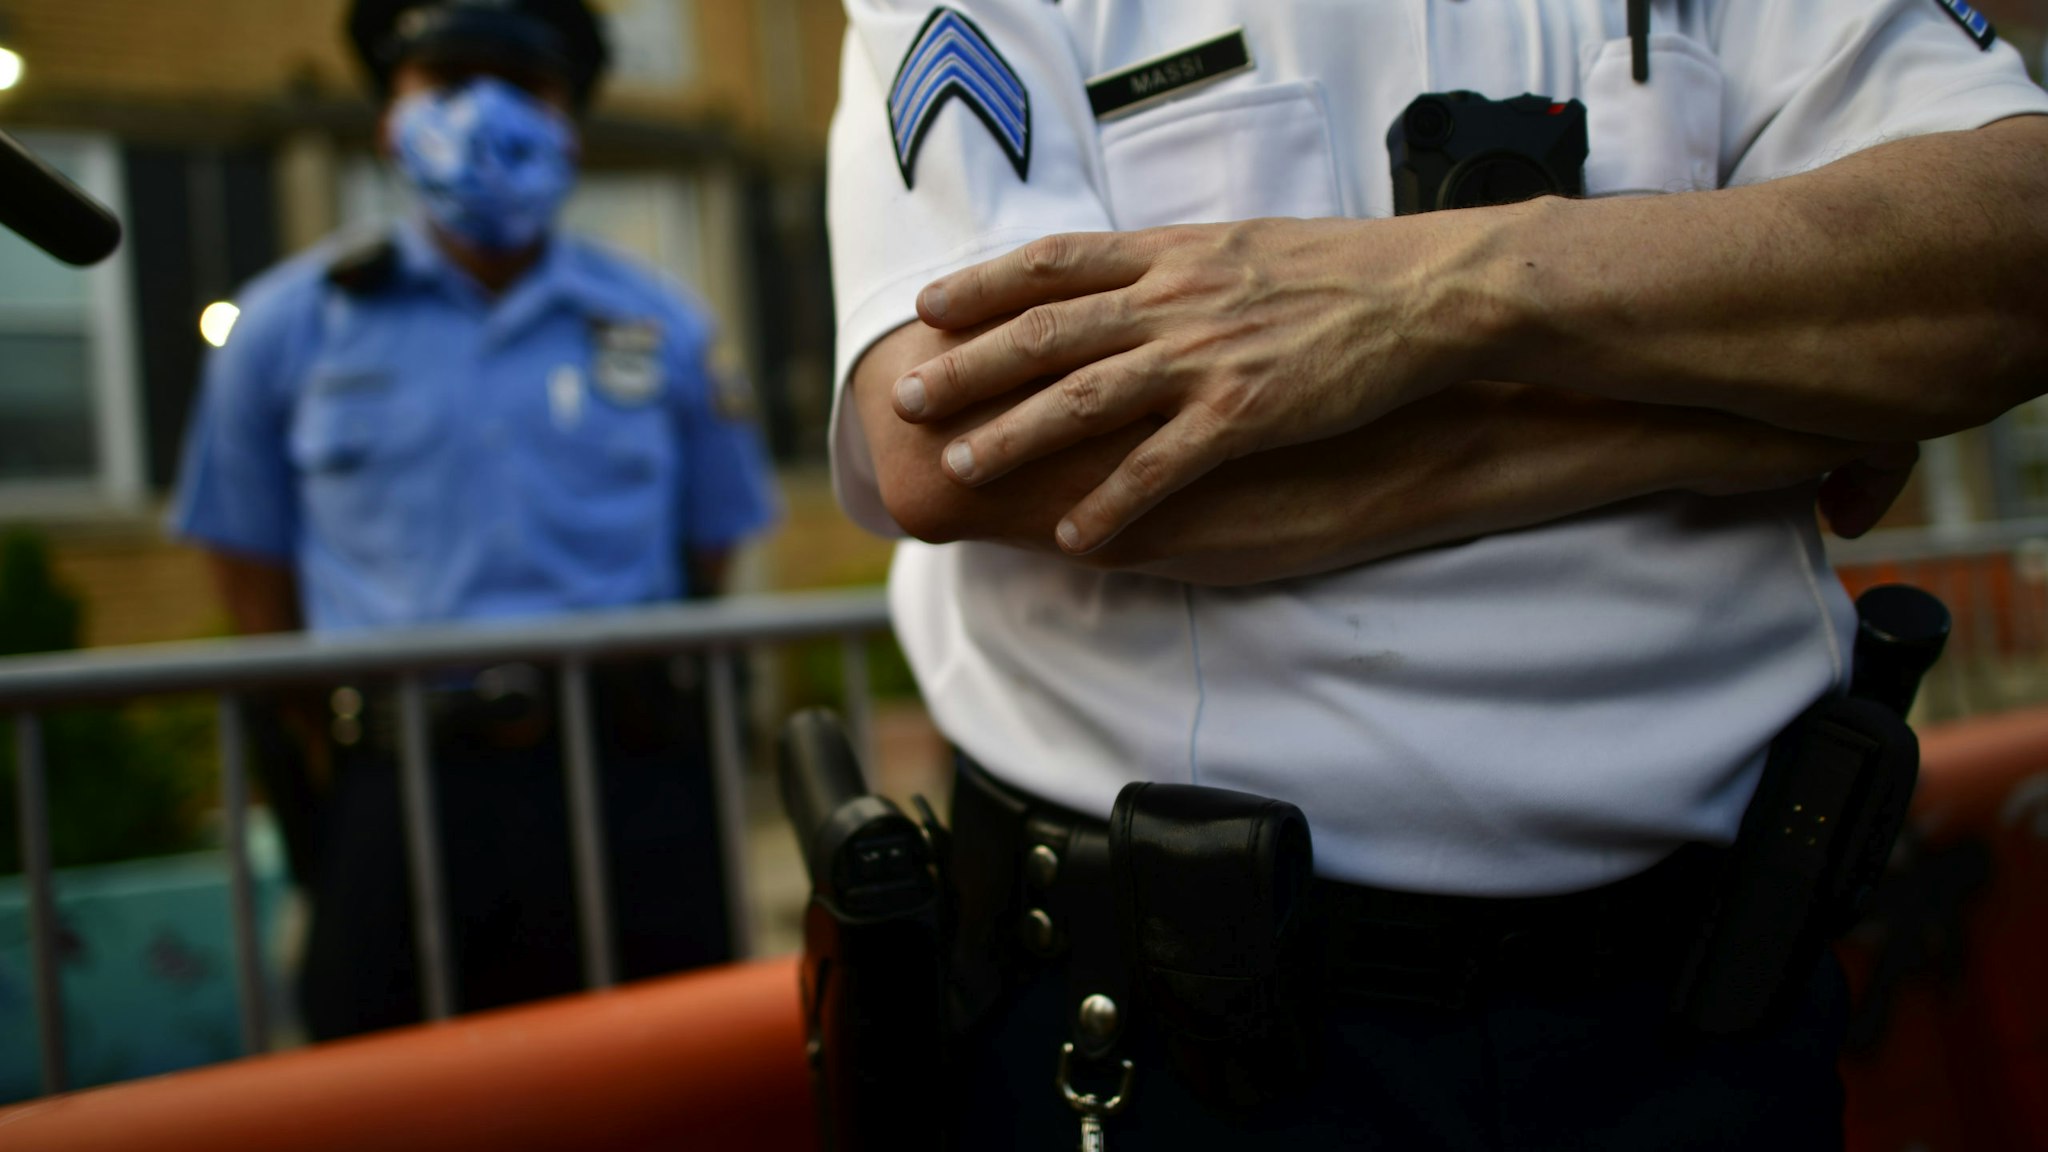 PHILADELPHIA, PA - JUNE 03: A police officer crosses his arms while observing activists gathering in protest outside the 26th Precinct on June 3, 2020 in Philadelphia, Pennsylvania. Protests continue to erupt in cities throughout the country over George Floyd, the black man who died while in police custody in Minneapolis on May 25. (Photo by Mark Makela/Getty Images)